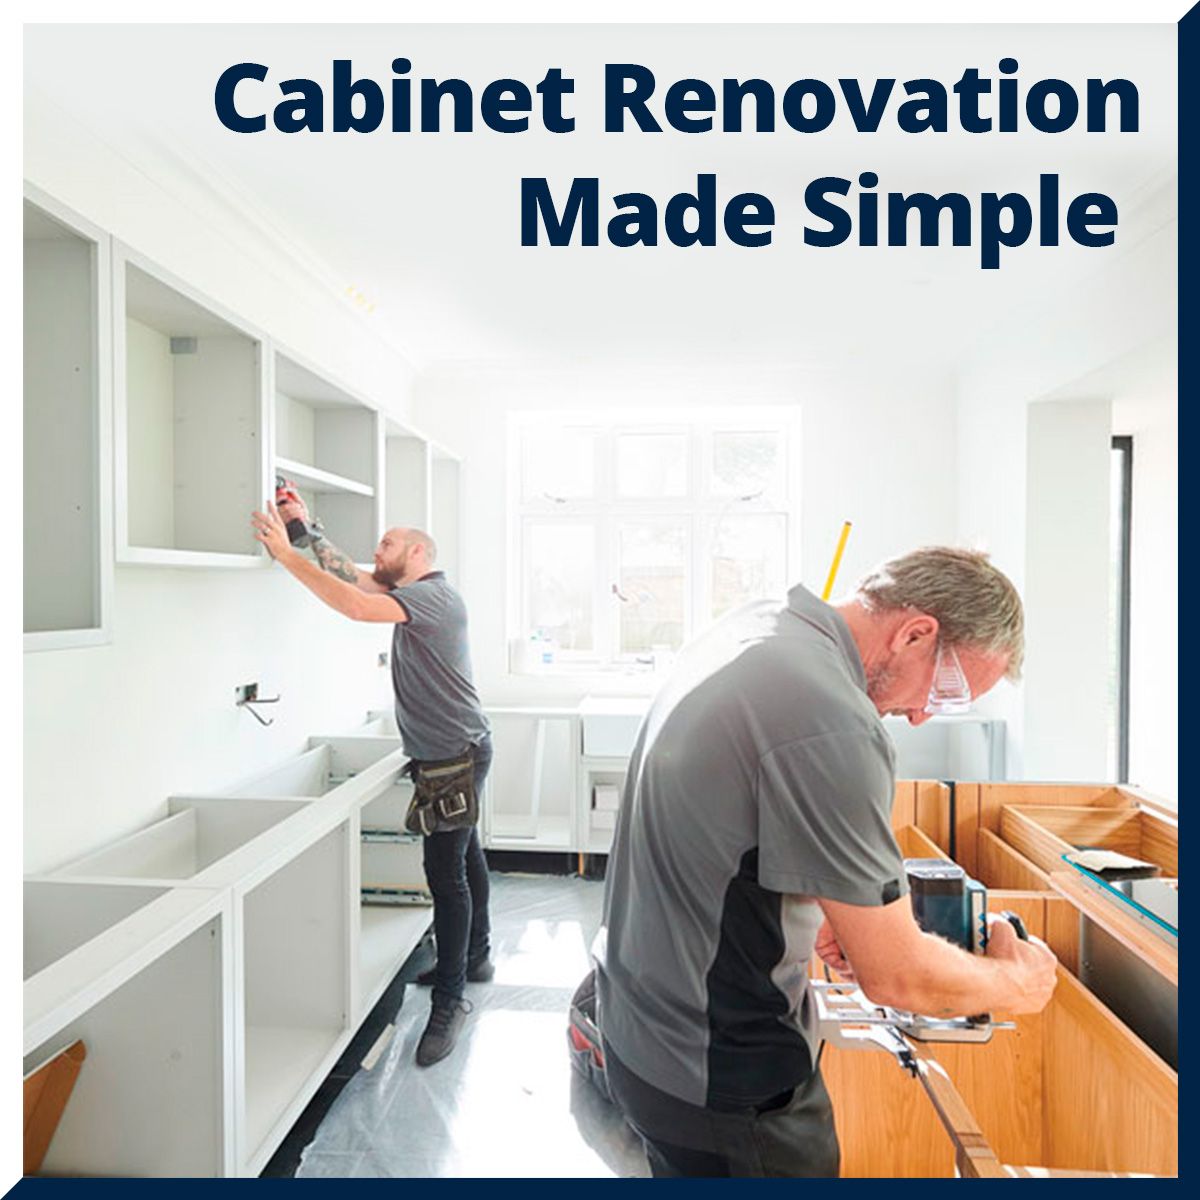 Cabinet Renovation Made Simple